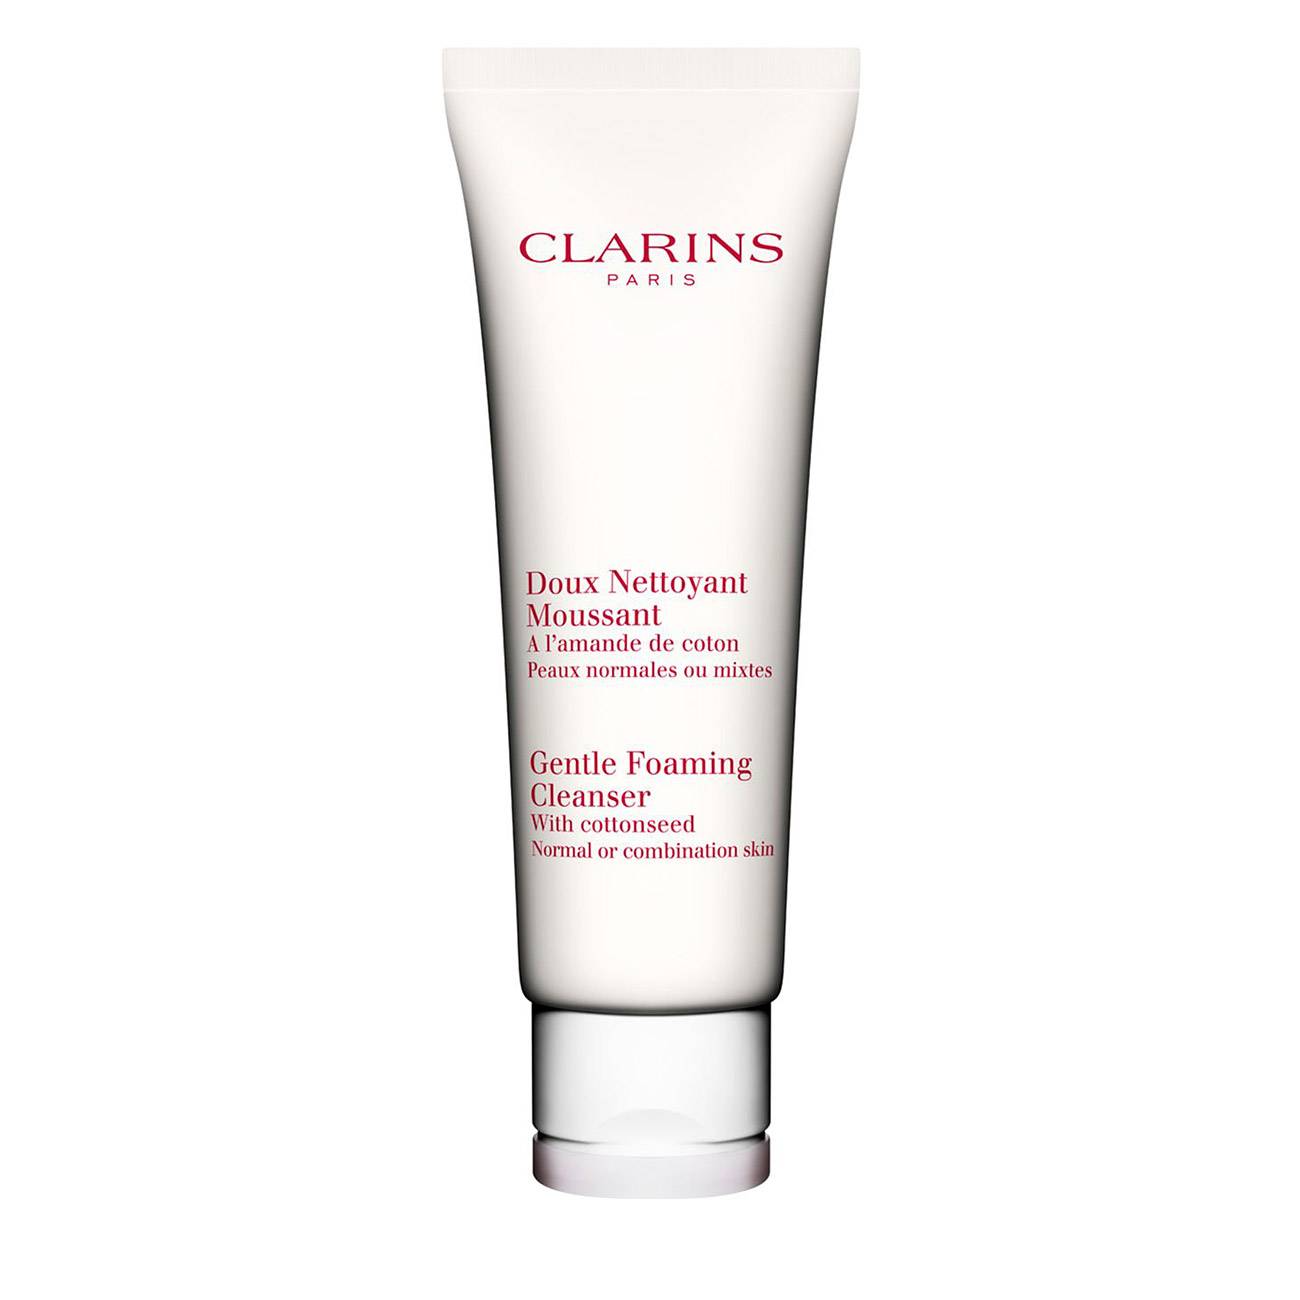 CLEANSING GENTLE FOAMING CLEANSER COMBINATION SKIN 125 ml 125